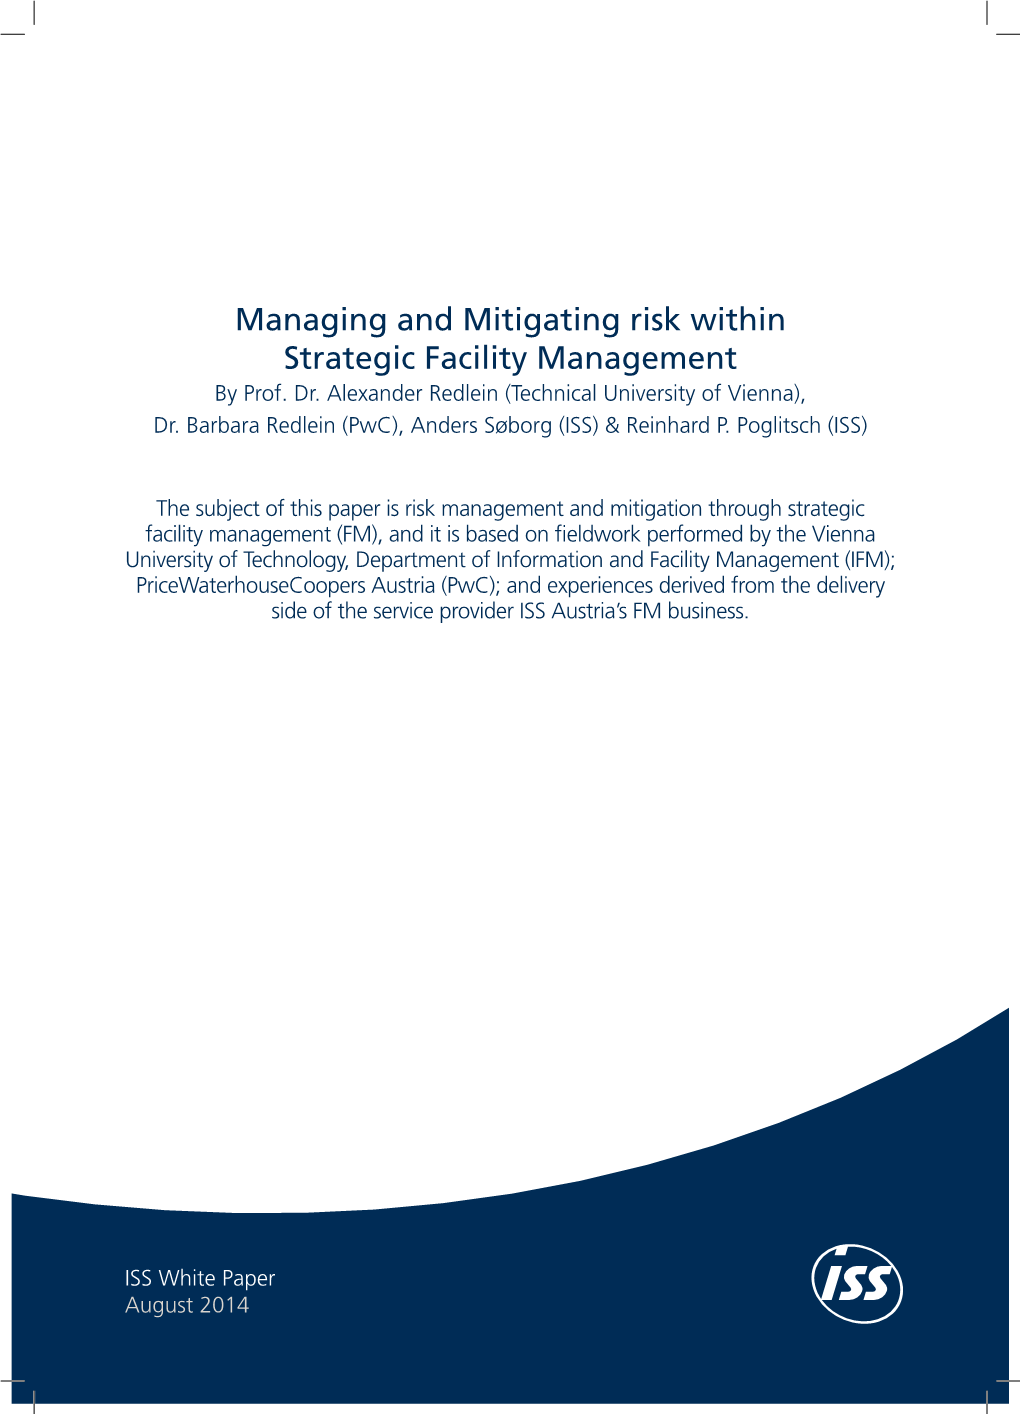 Managing and Mitigating Risk Within Strategic Facility Management by Prof